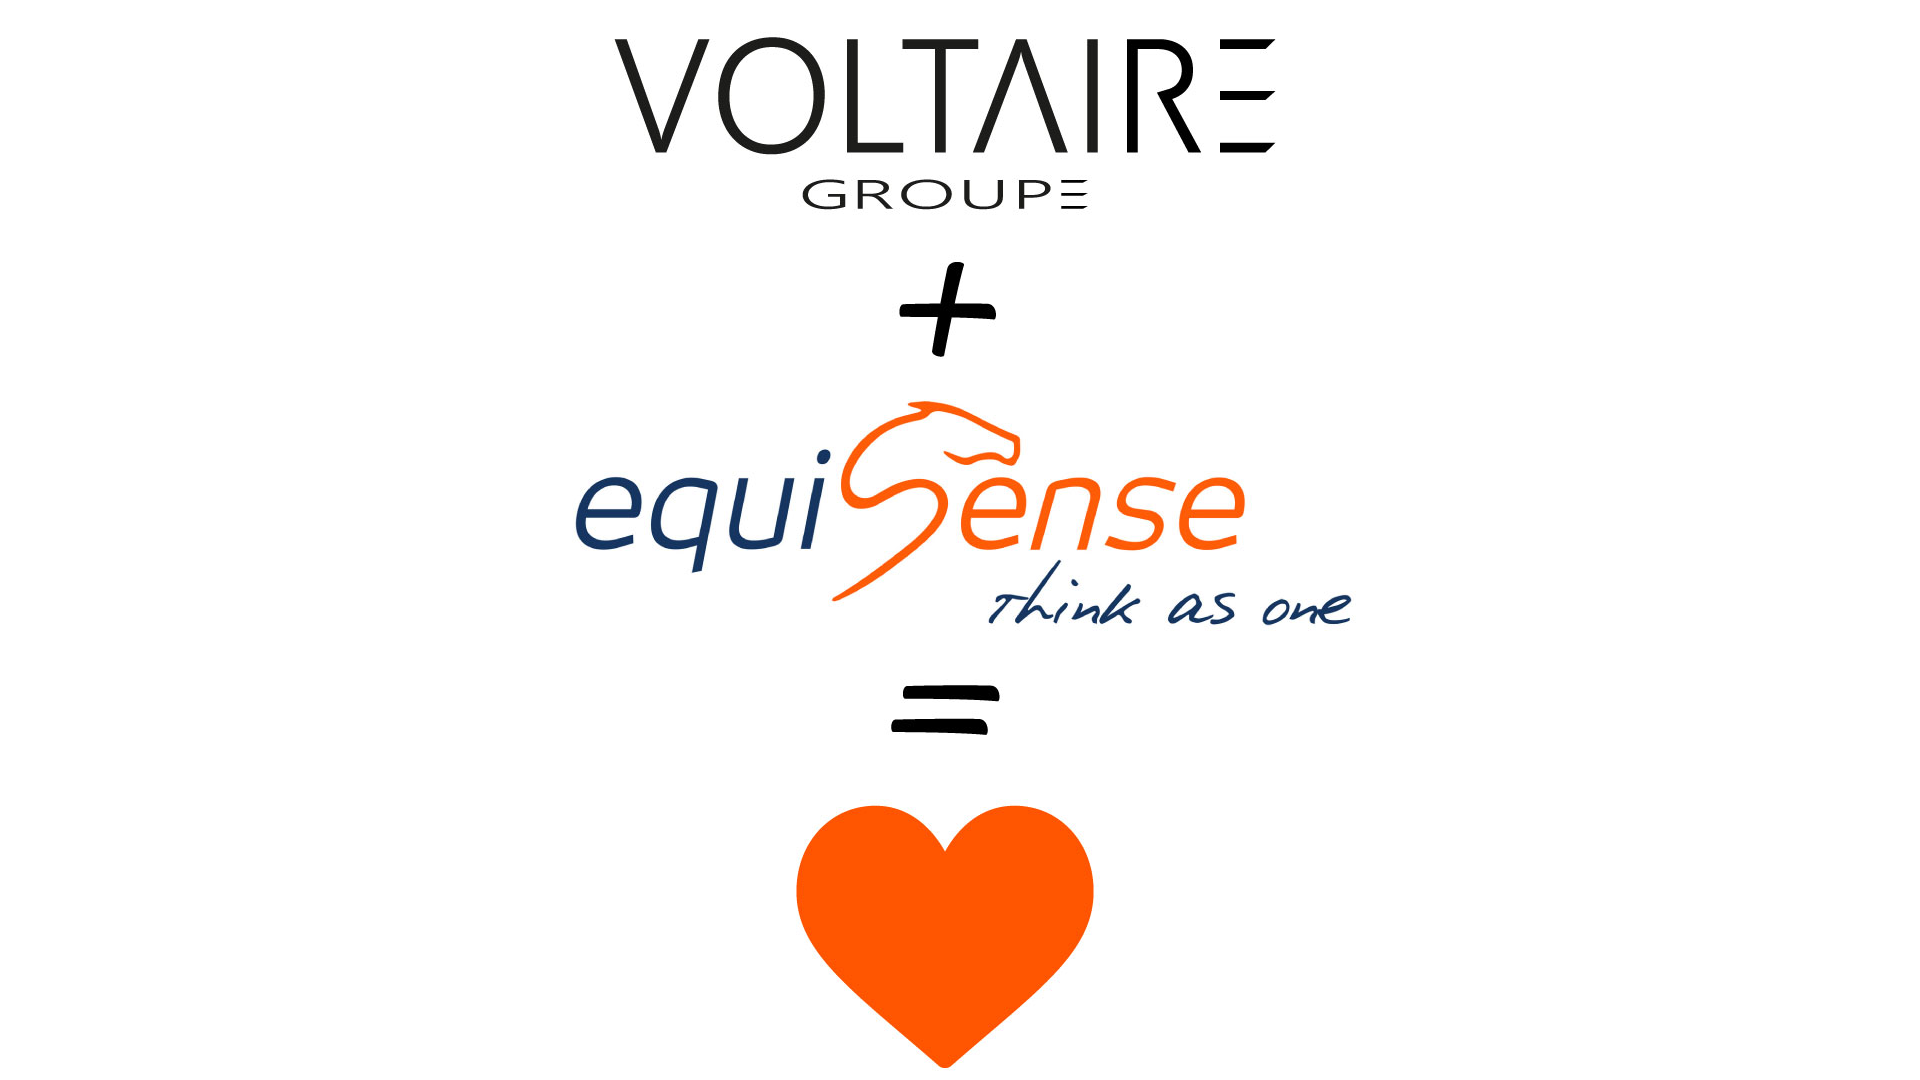 Youngleaf Com - Equisense join the Voltaire family -